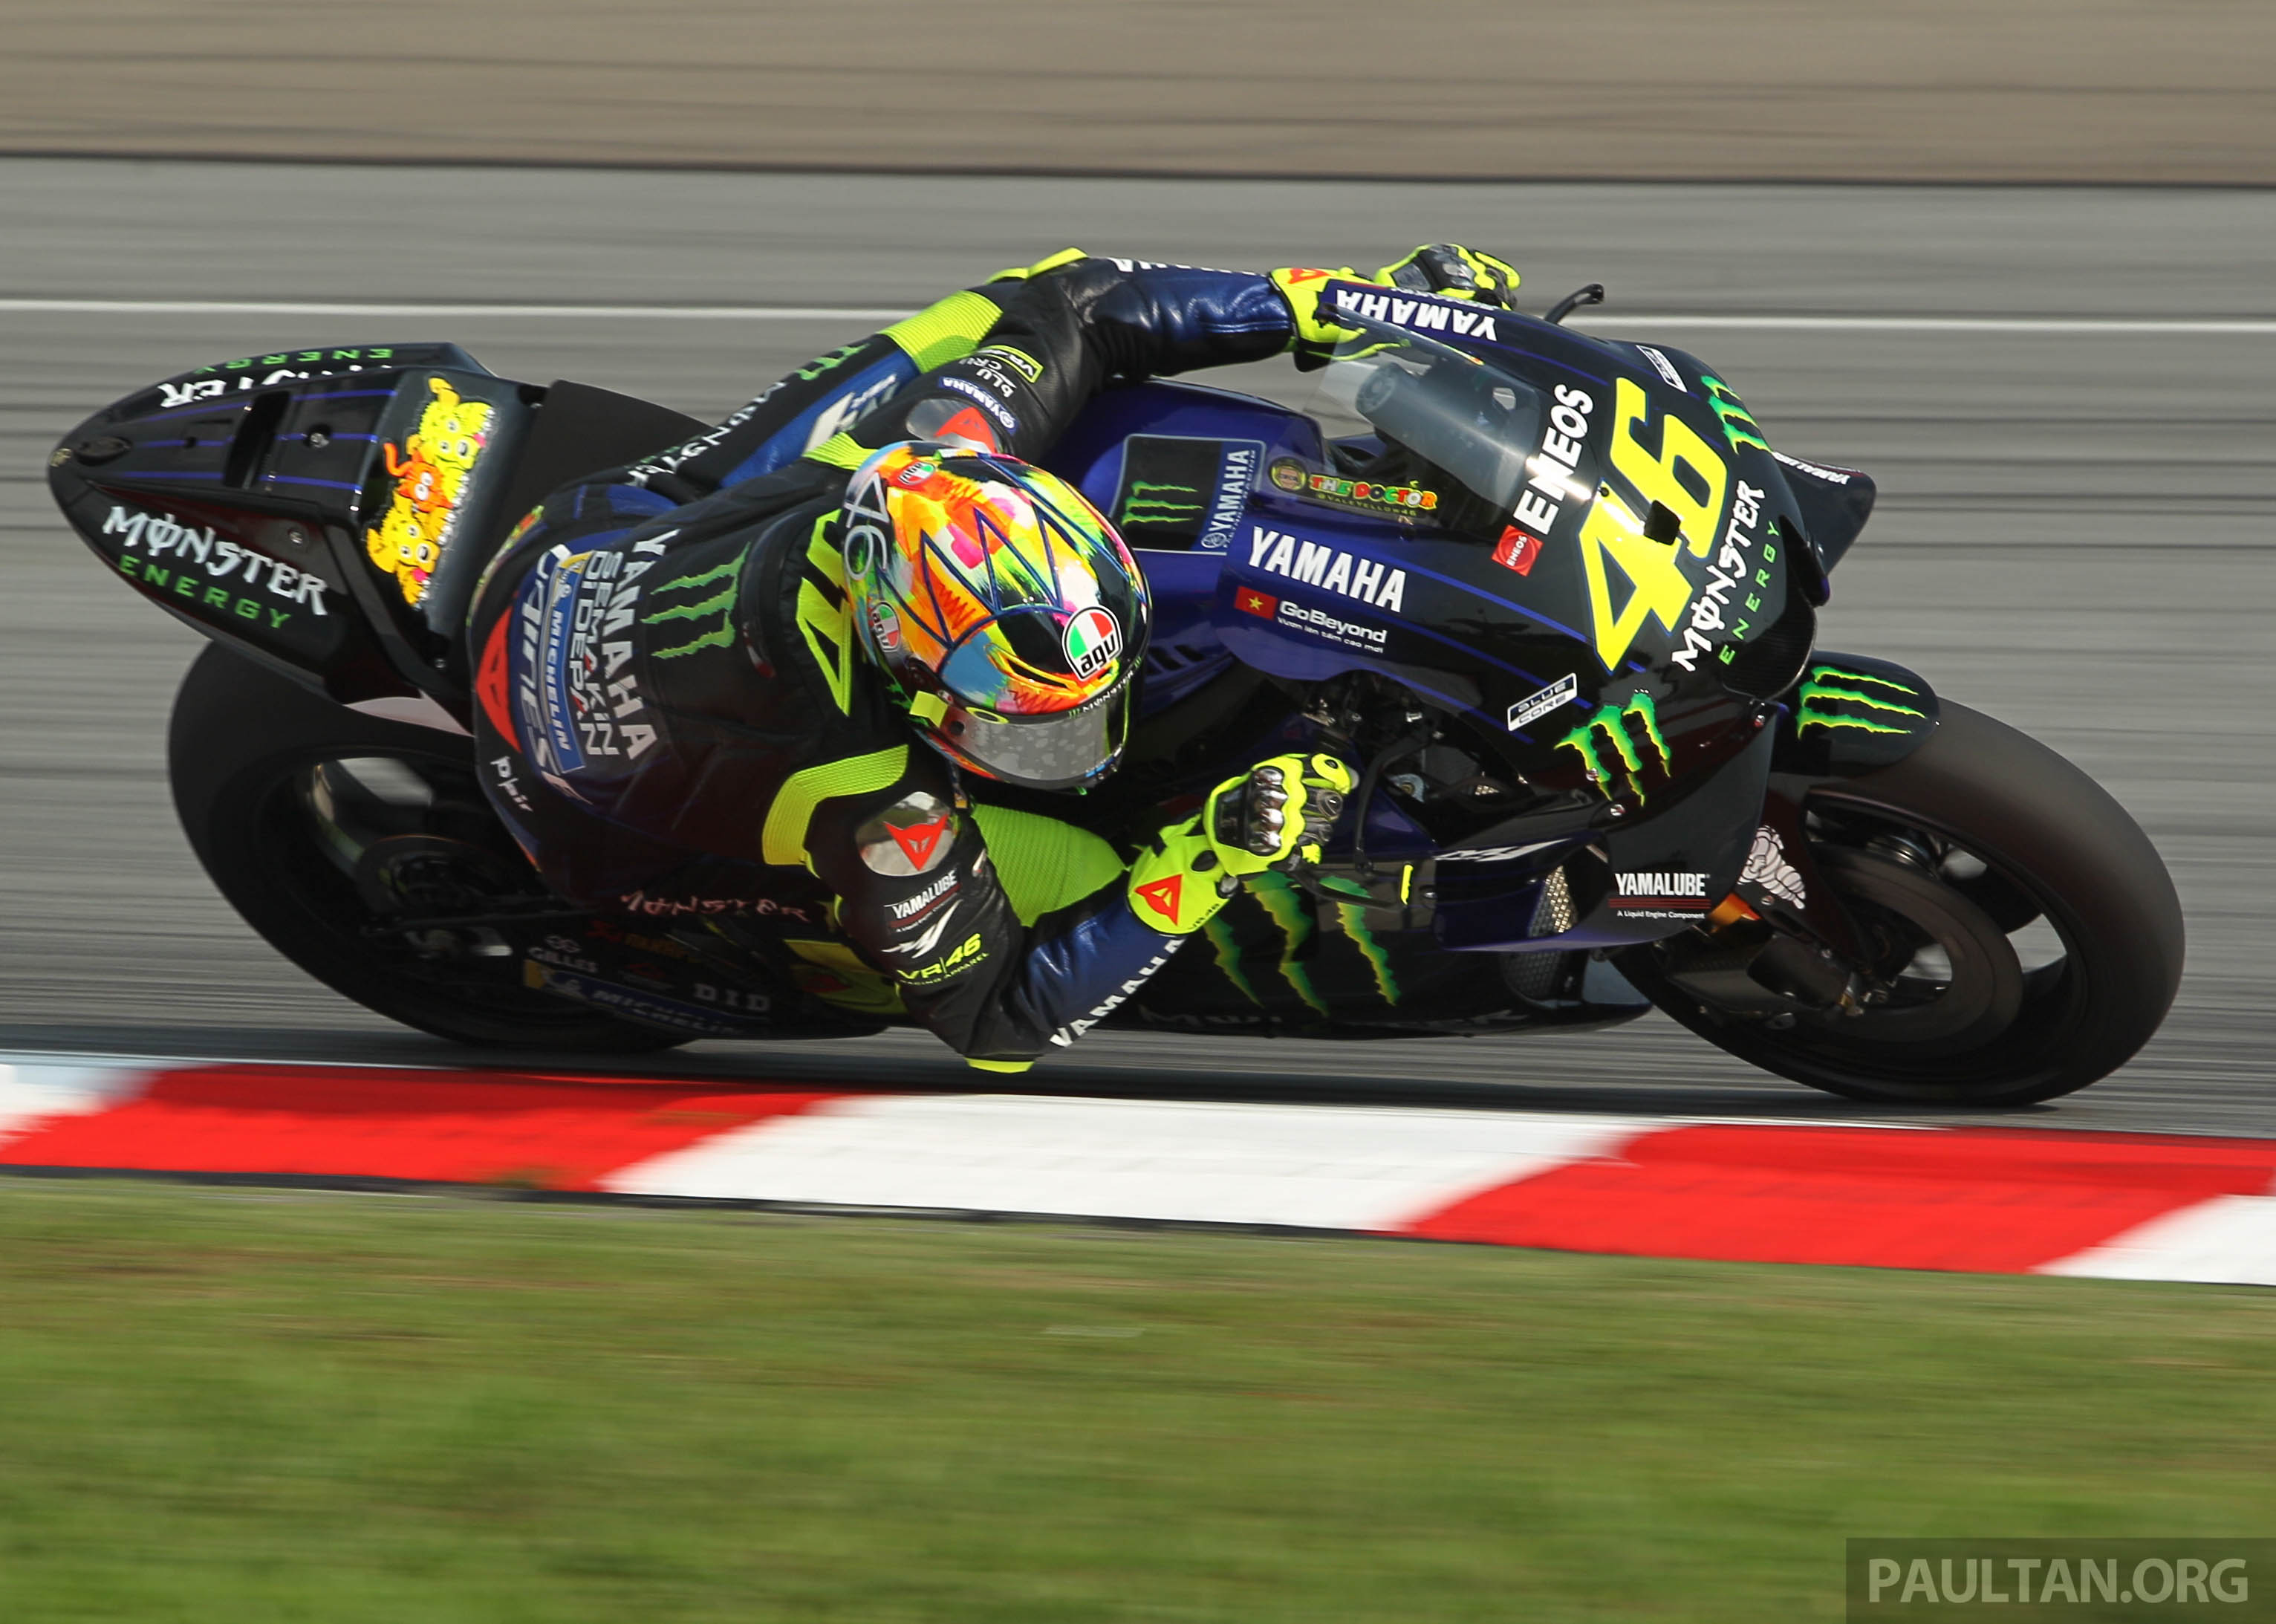 Lorenzo "better have a plan to deal with me," says Rossi 2019 testing begins in Sepang - paultan.org